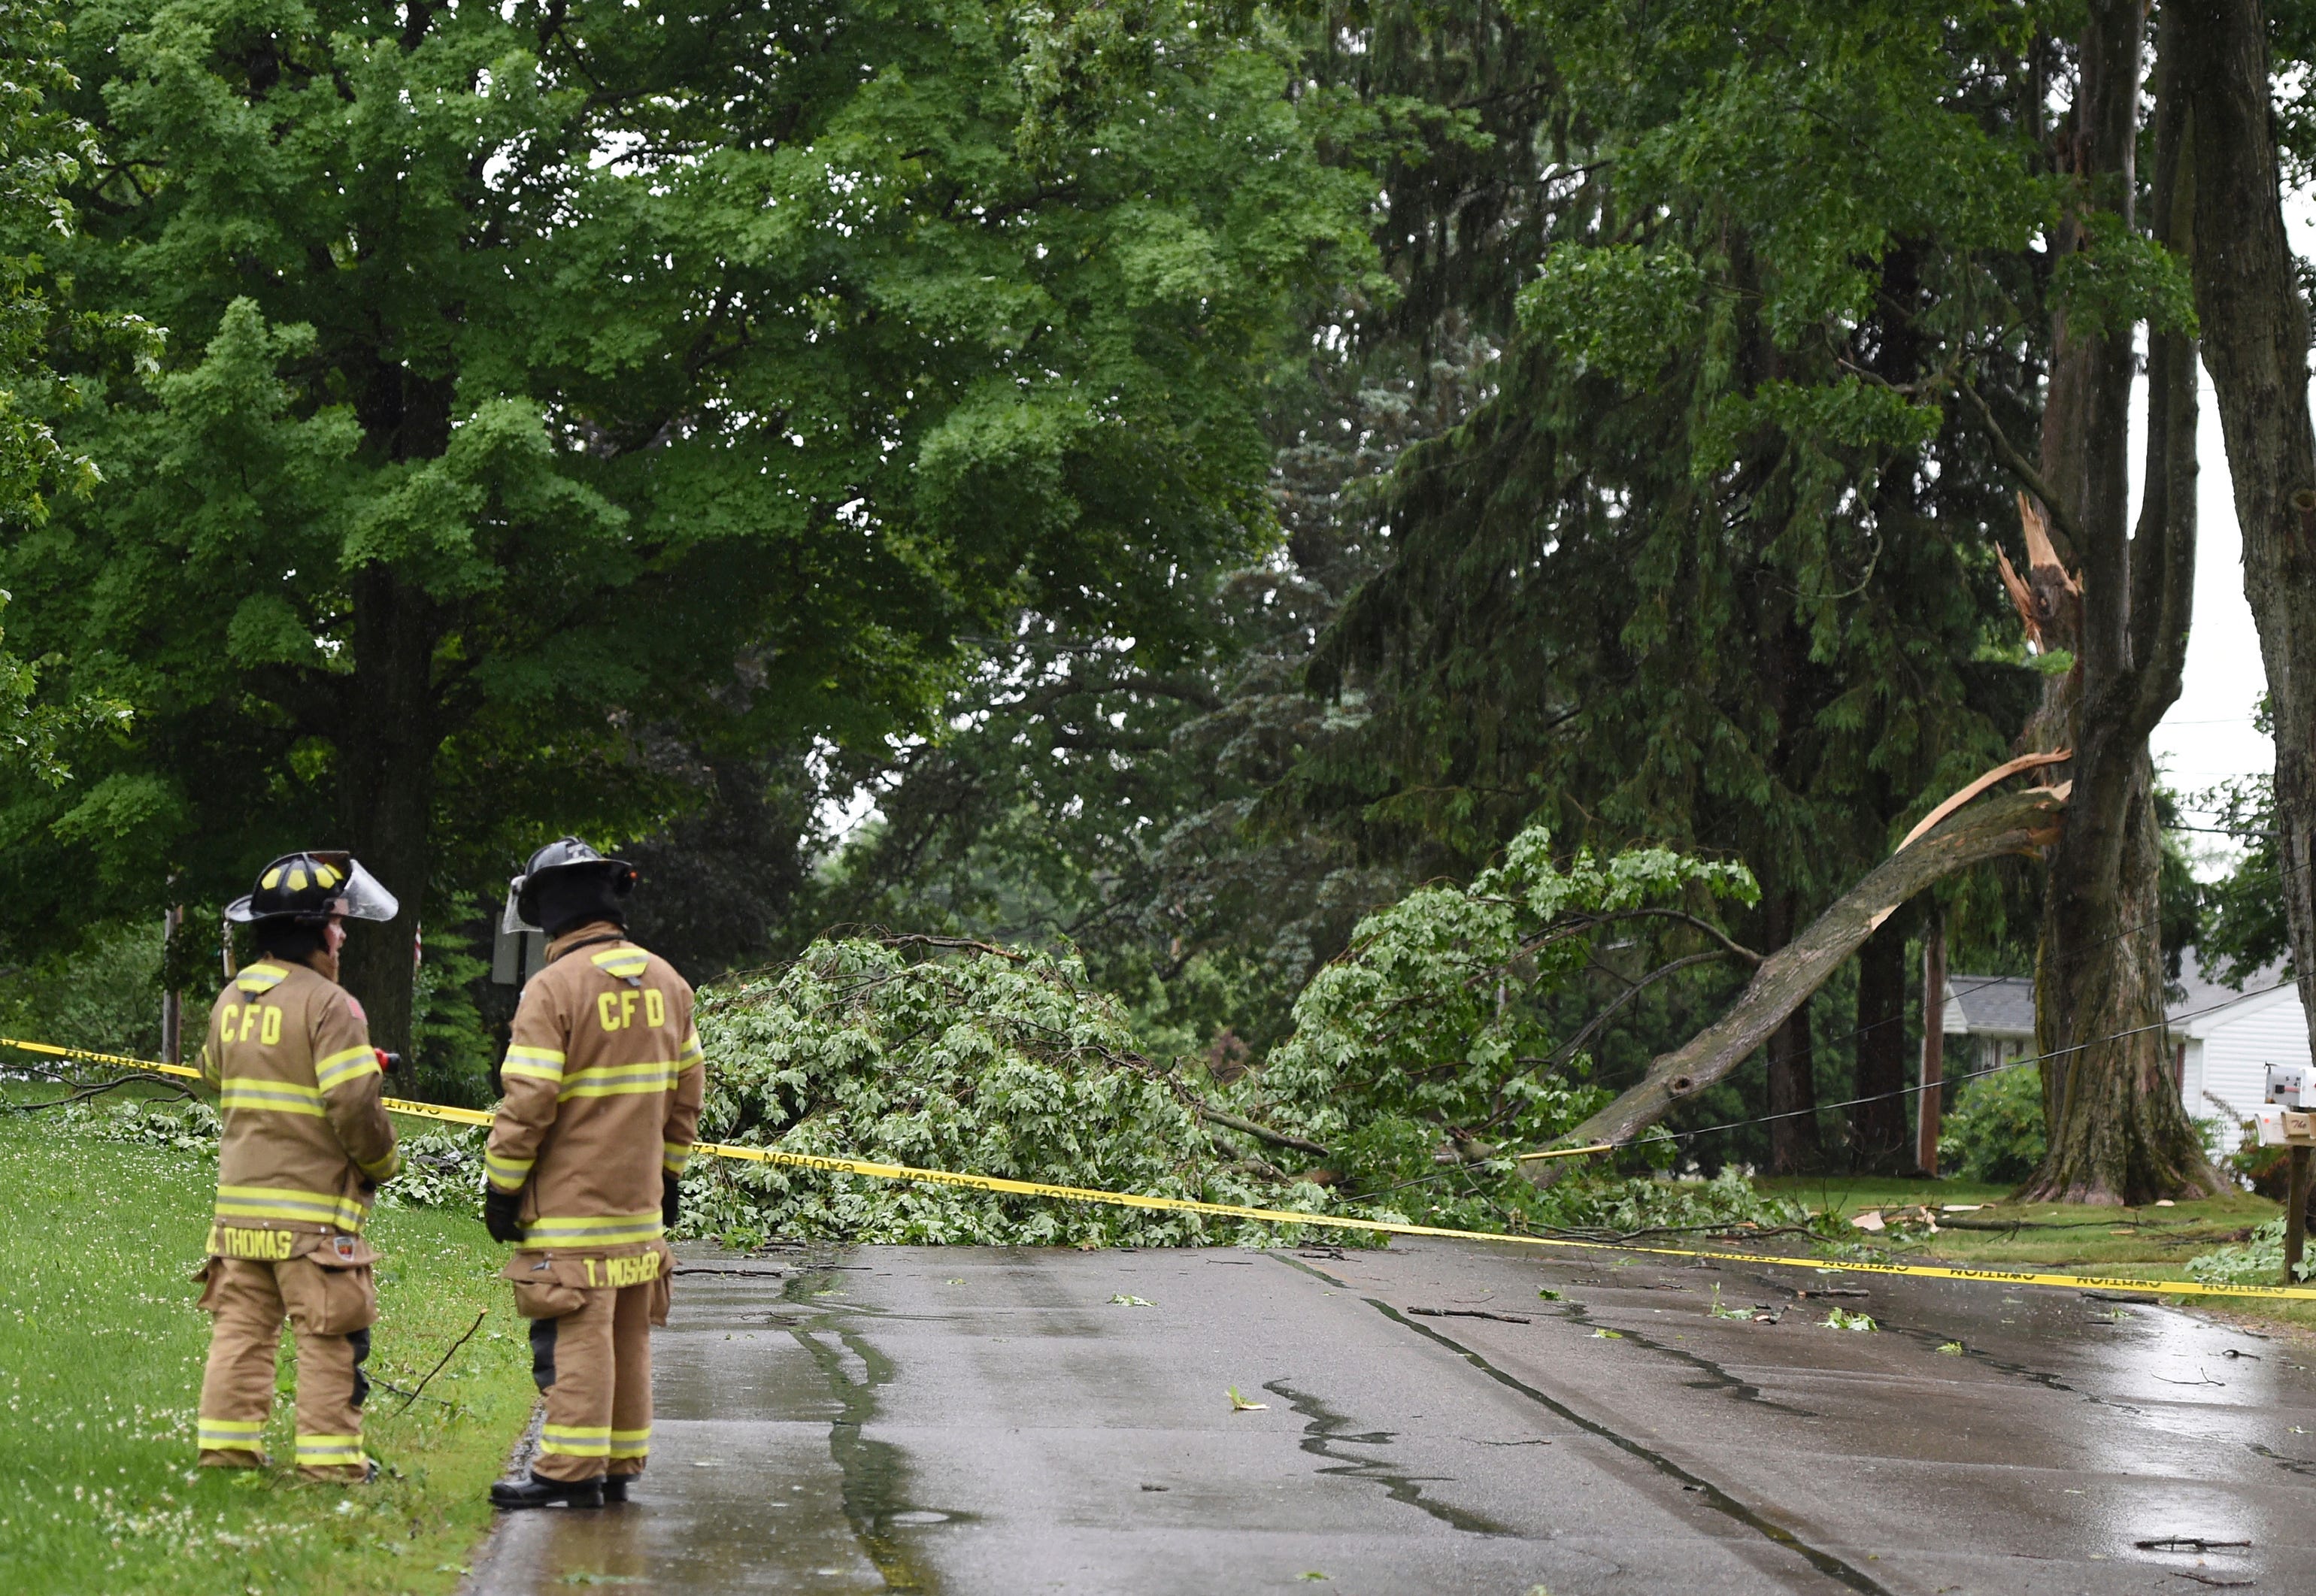 Concord firefighters work at the scene of a downed tree and power line on Main Street on Wednesday, June 10, 2020. Strong storms with heavy winds swept across Jackson County causing power outages, downing trees and damaging property.